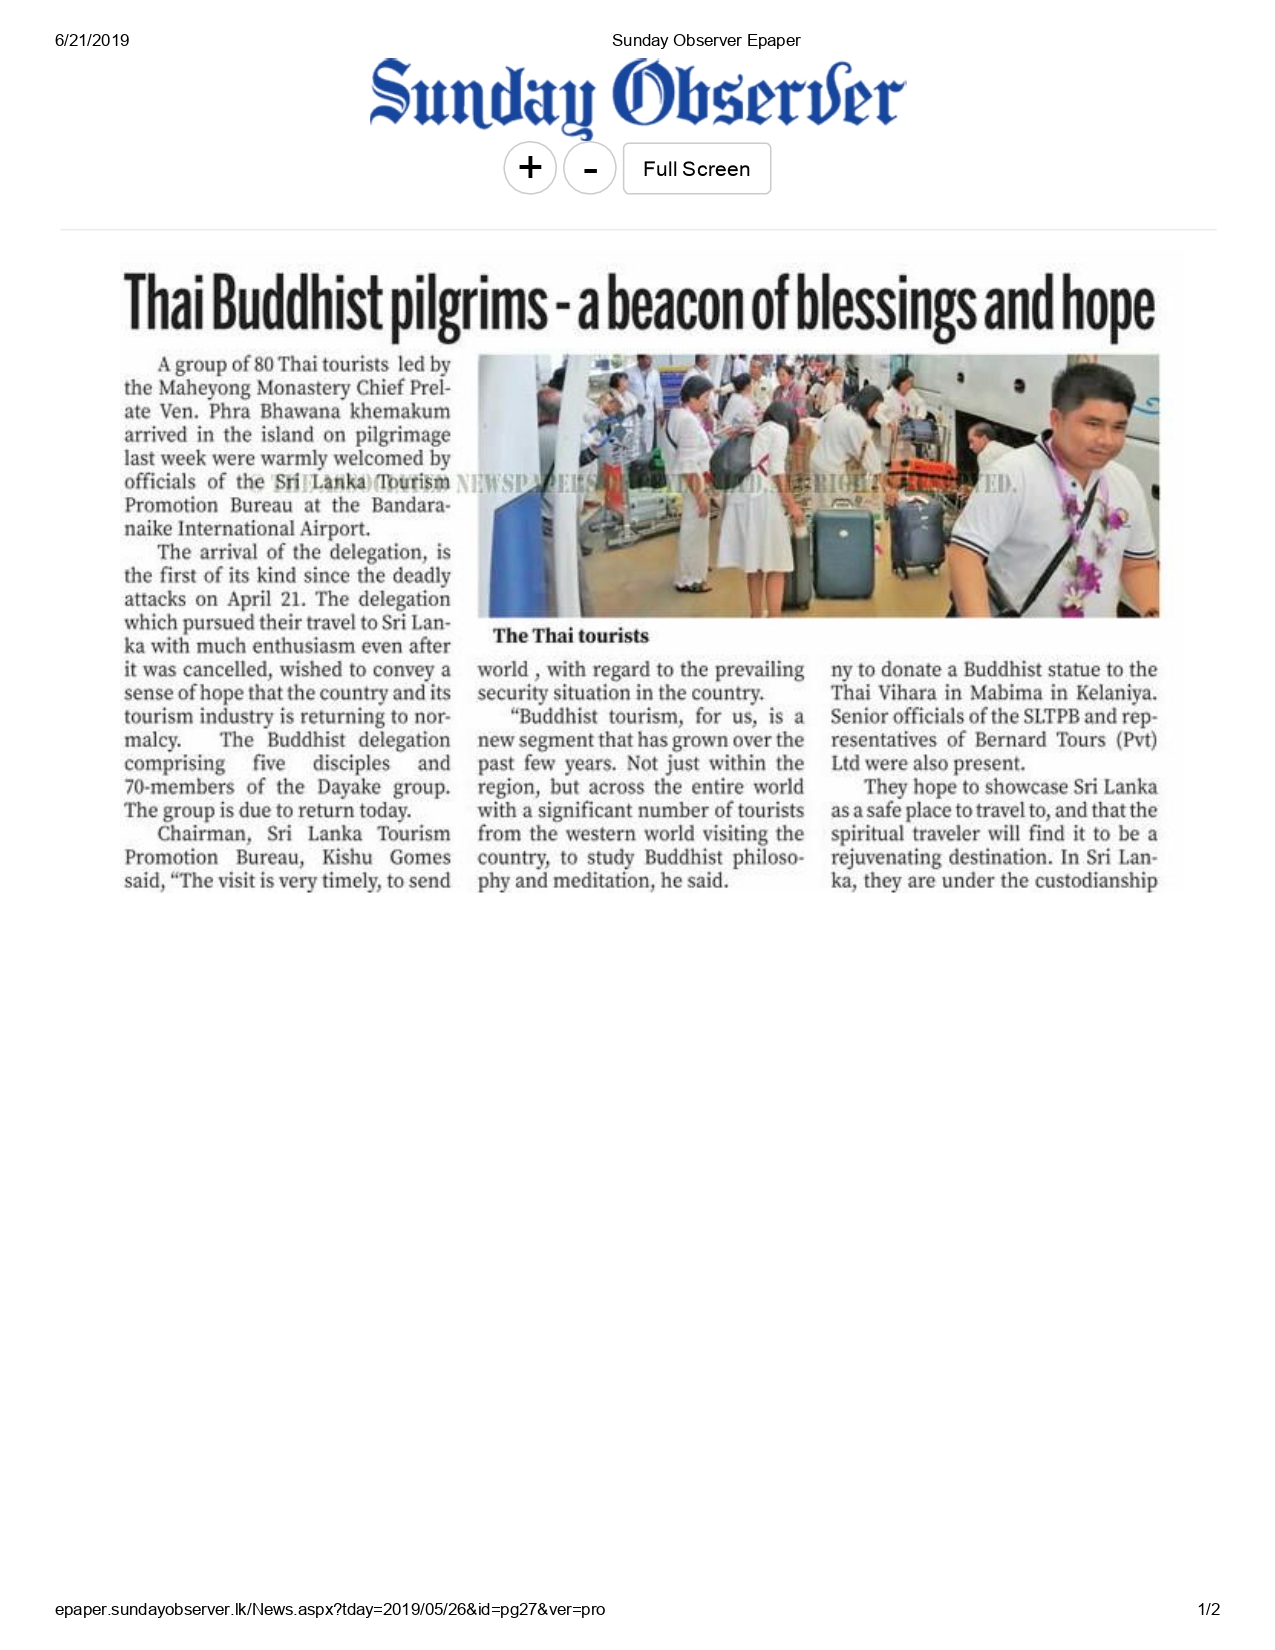 Thai Buddhist pilgrims - a beacon of blessings and hope